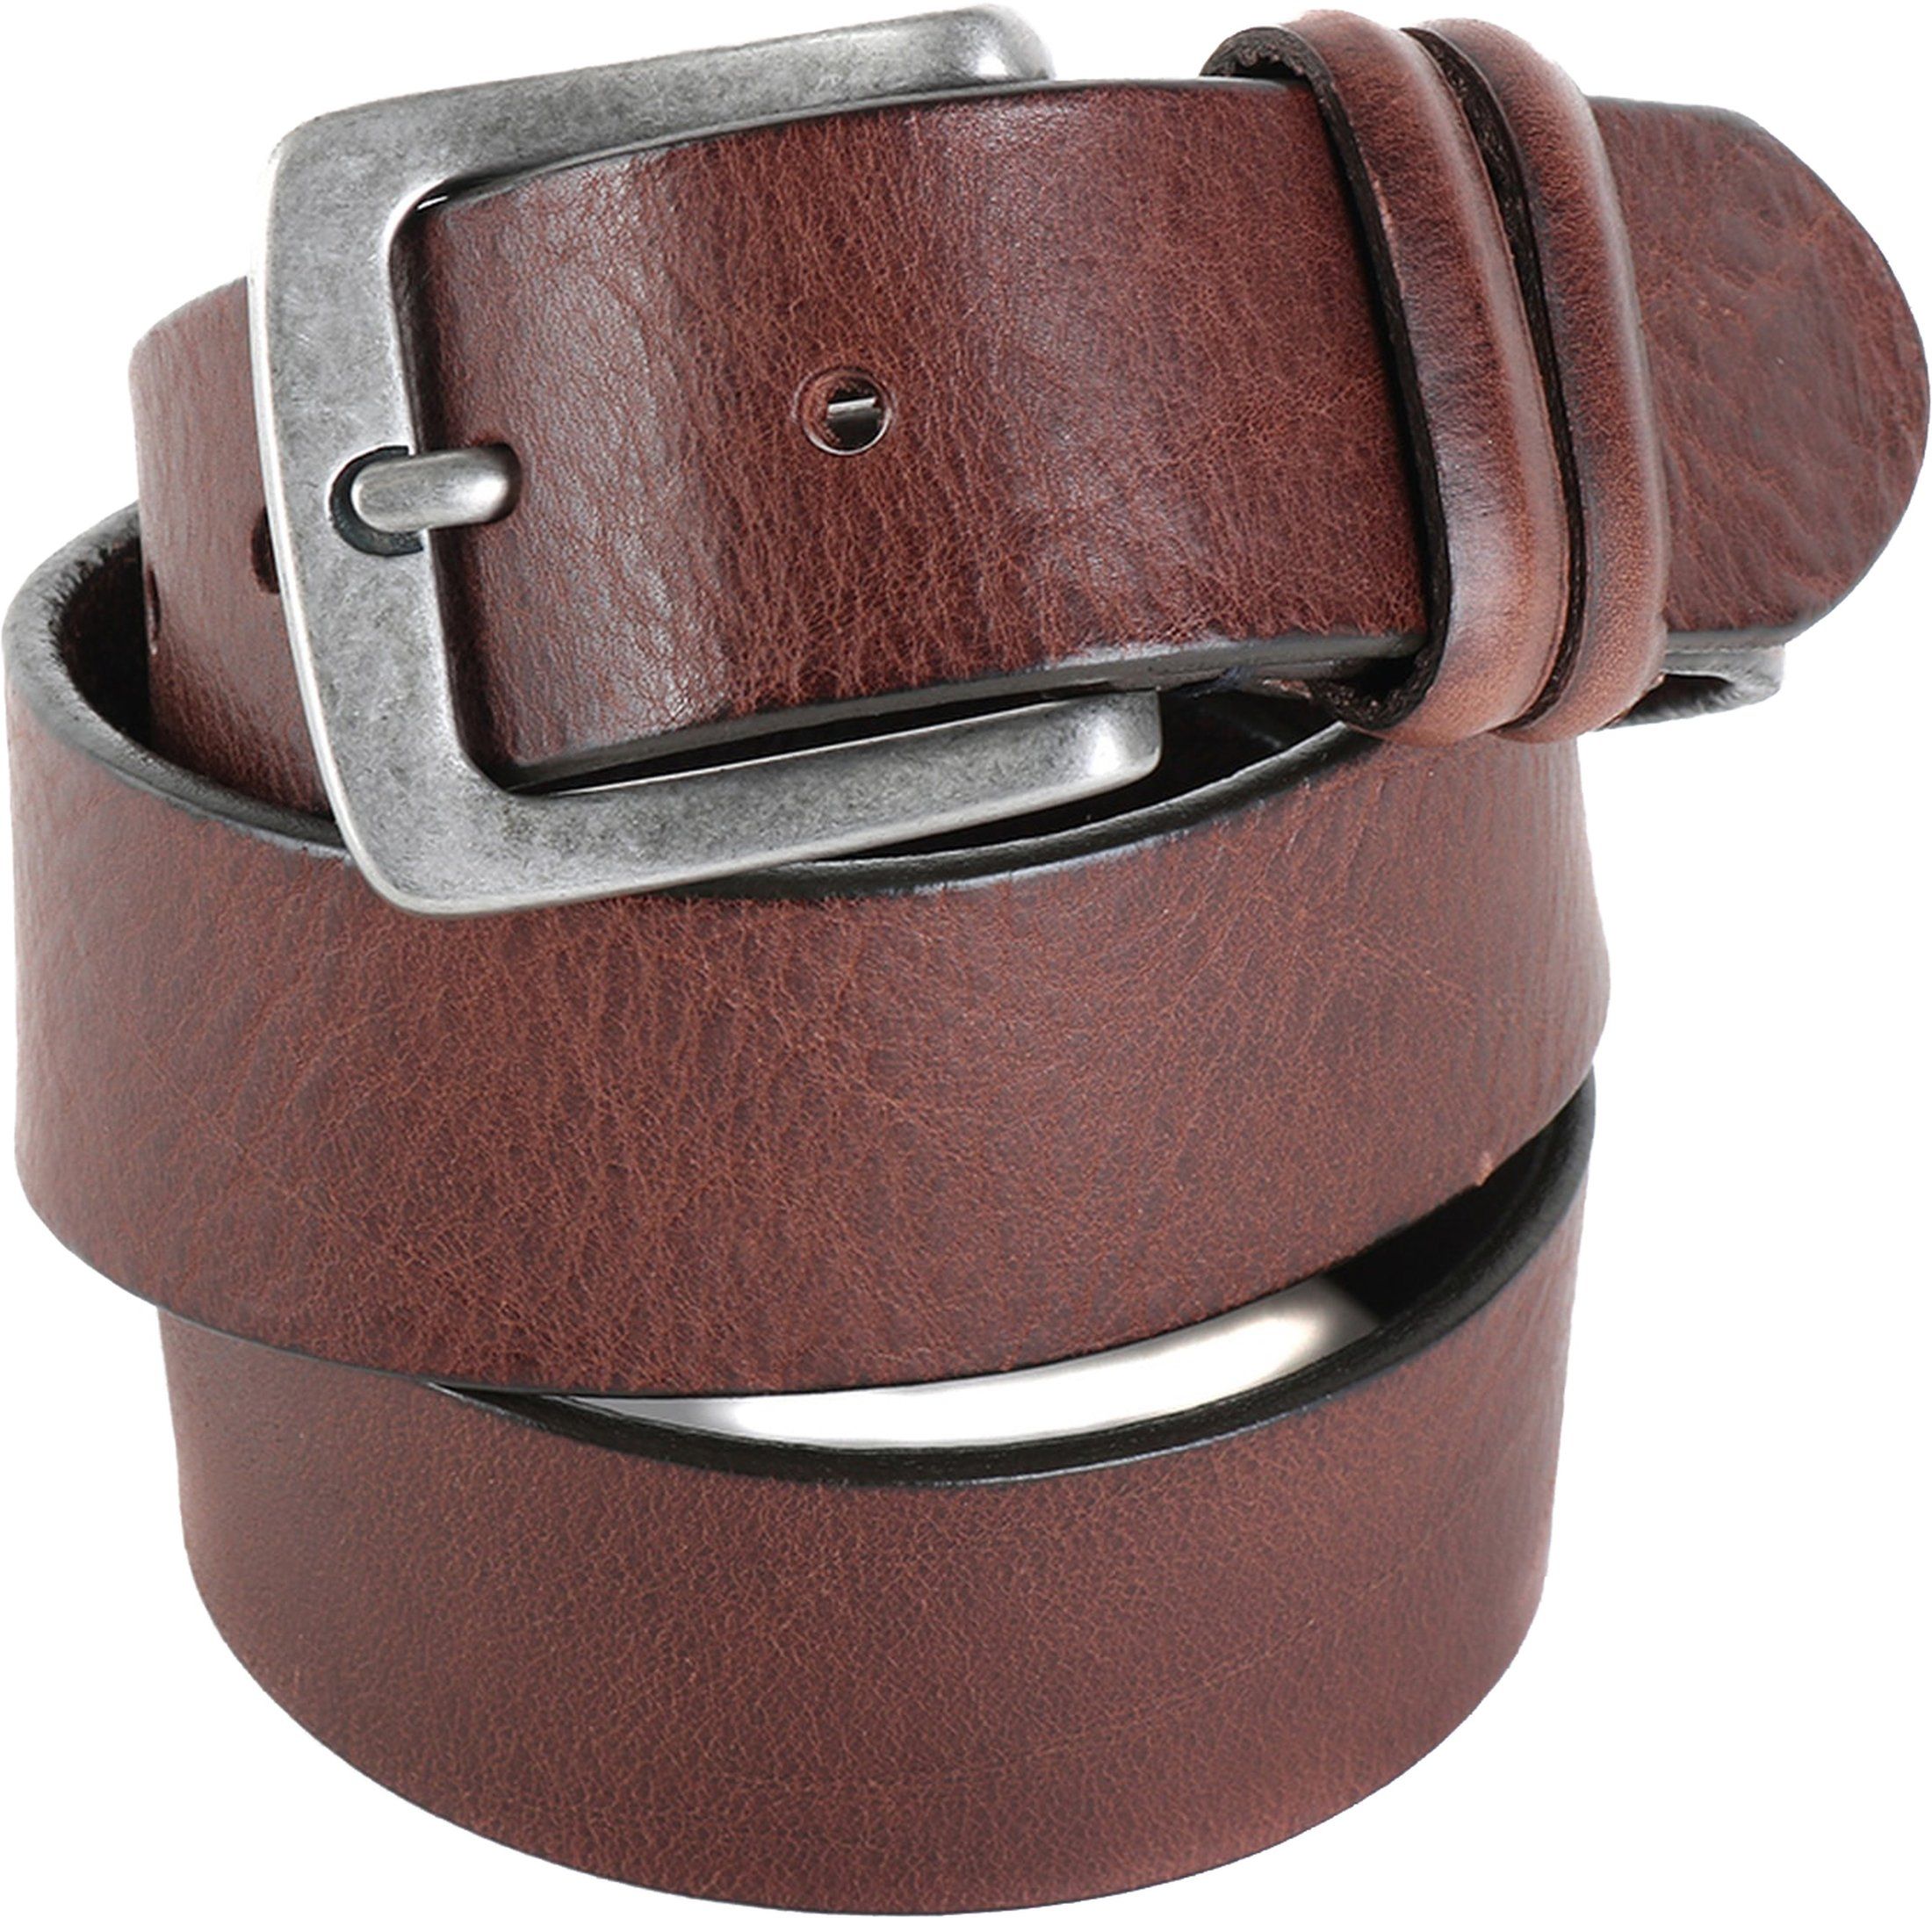 Profuomo Leather Belt Amsterdam Brown size 33.5